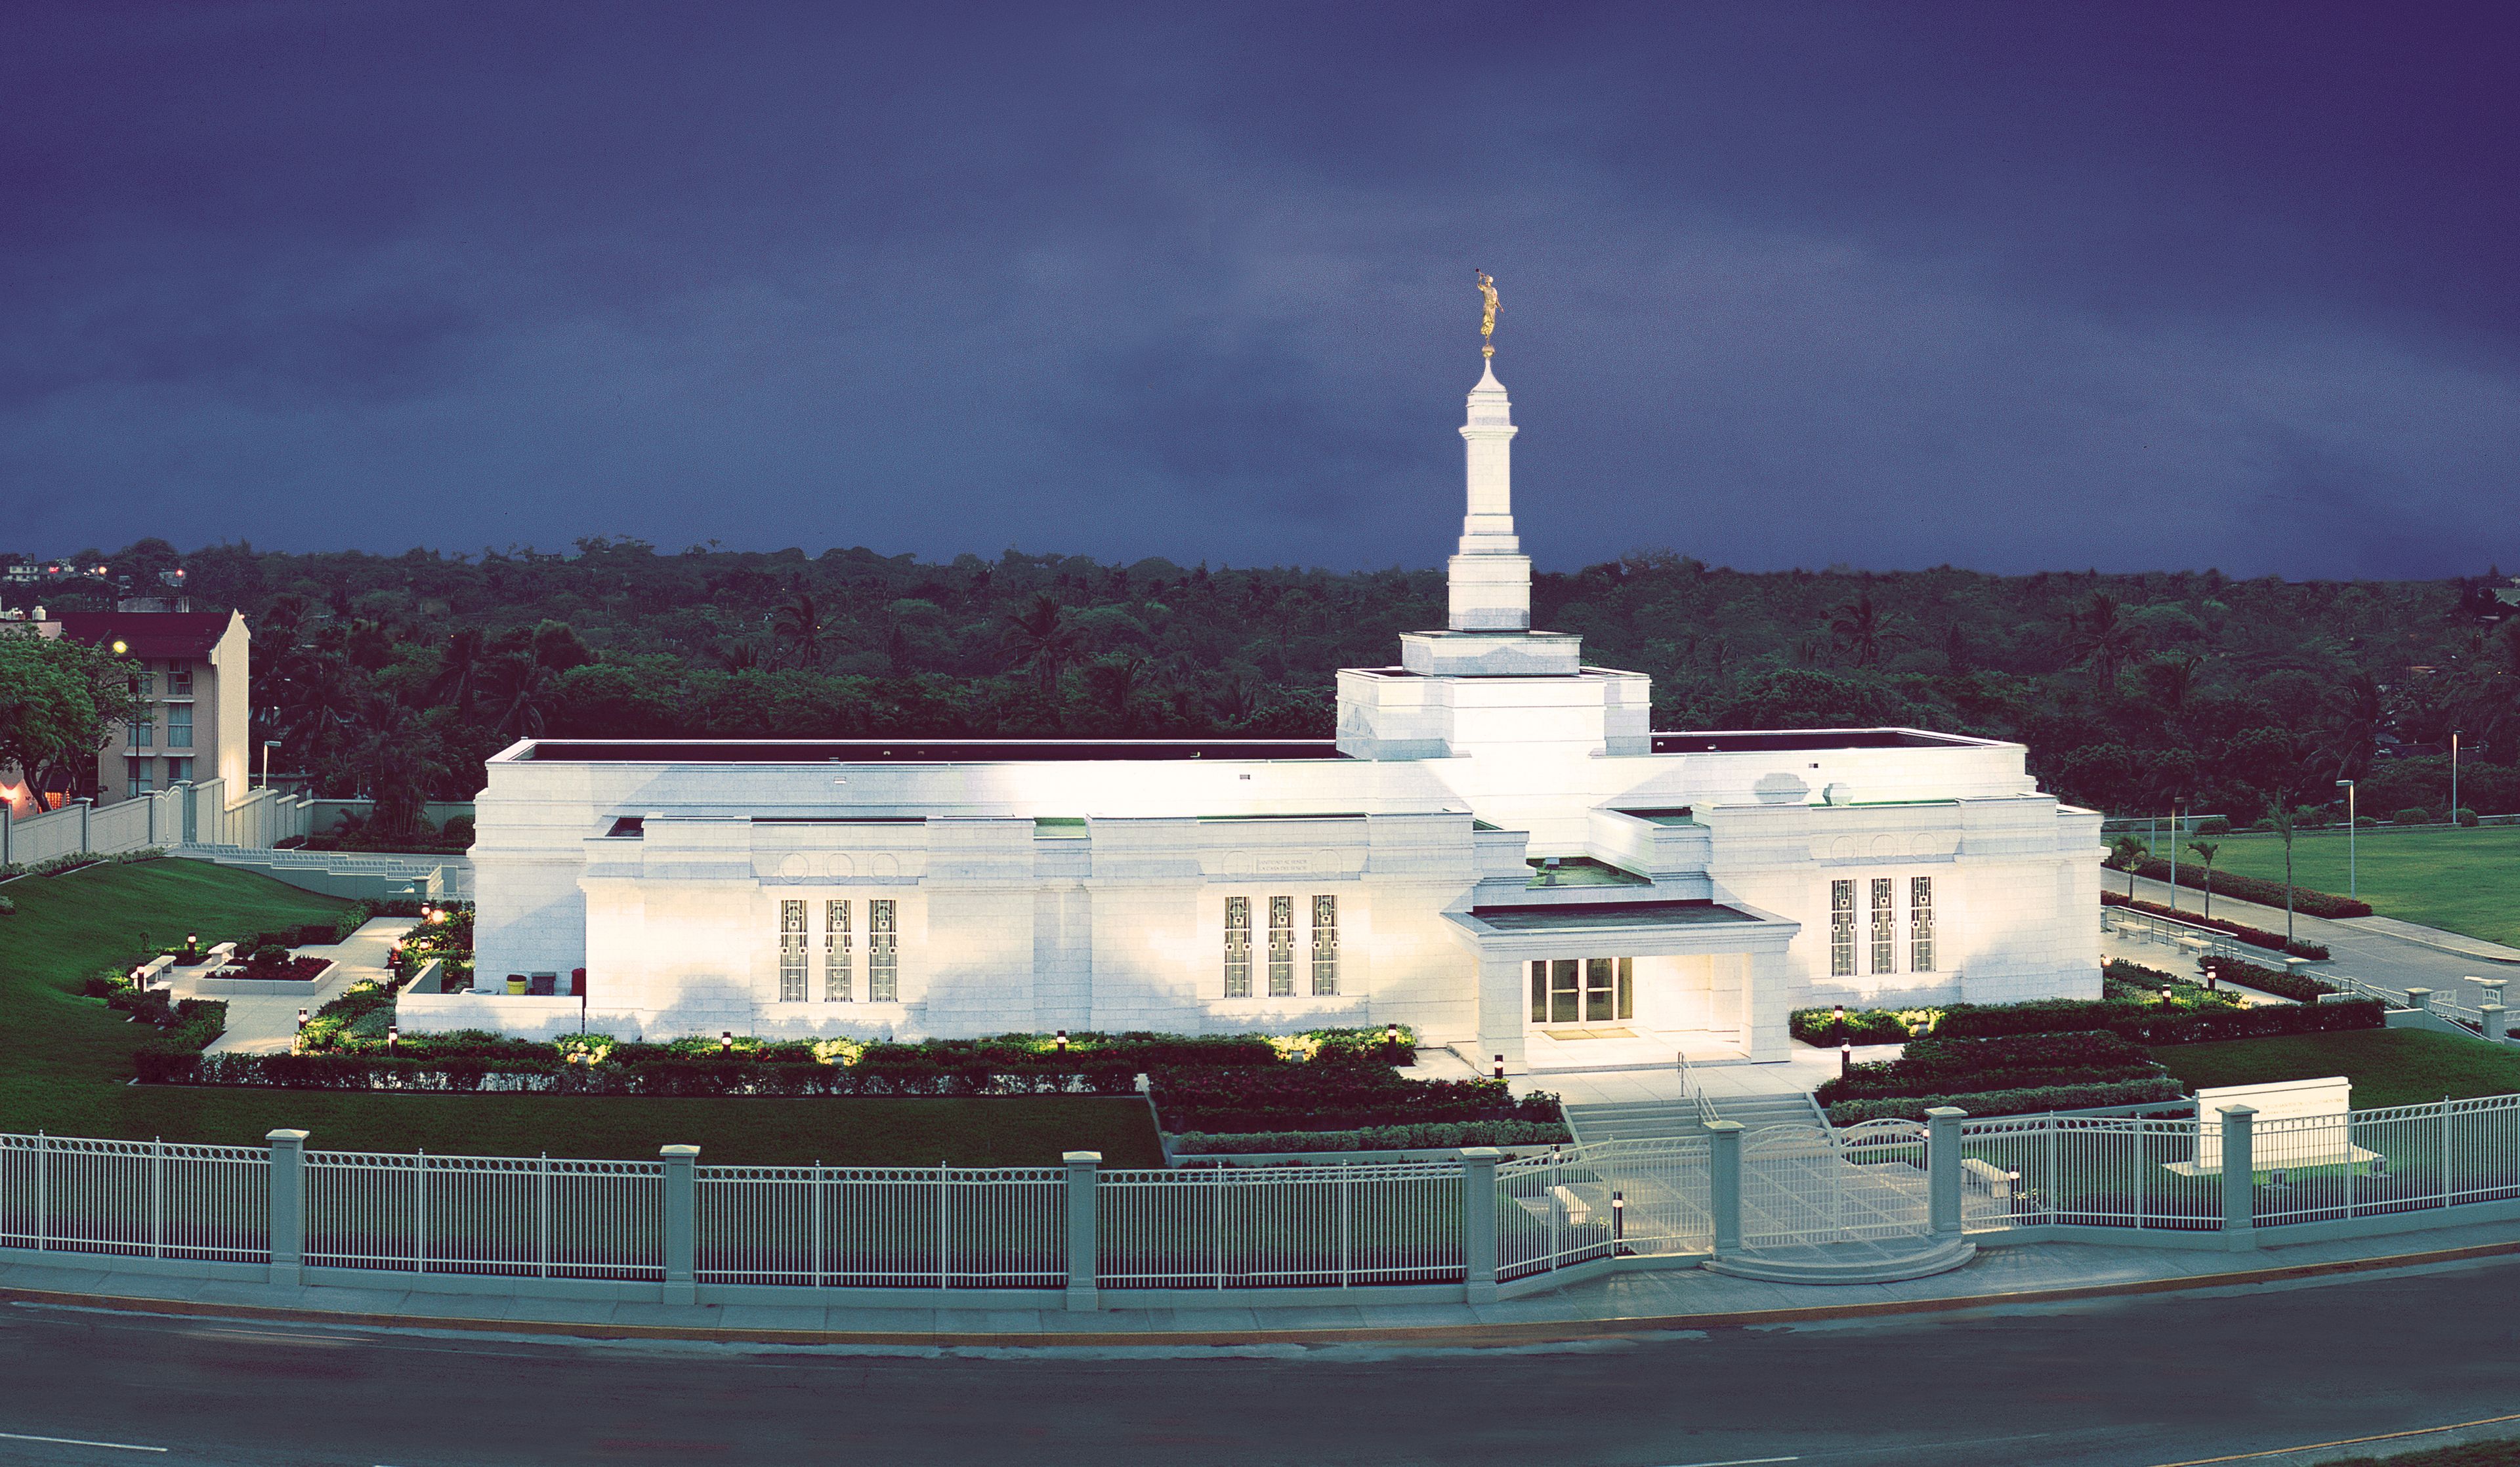 The Veracruz Mexico Temple in the evening, including the entrance and scenery.